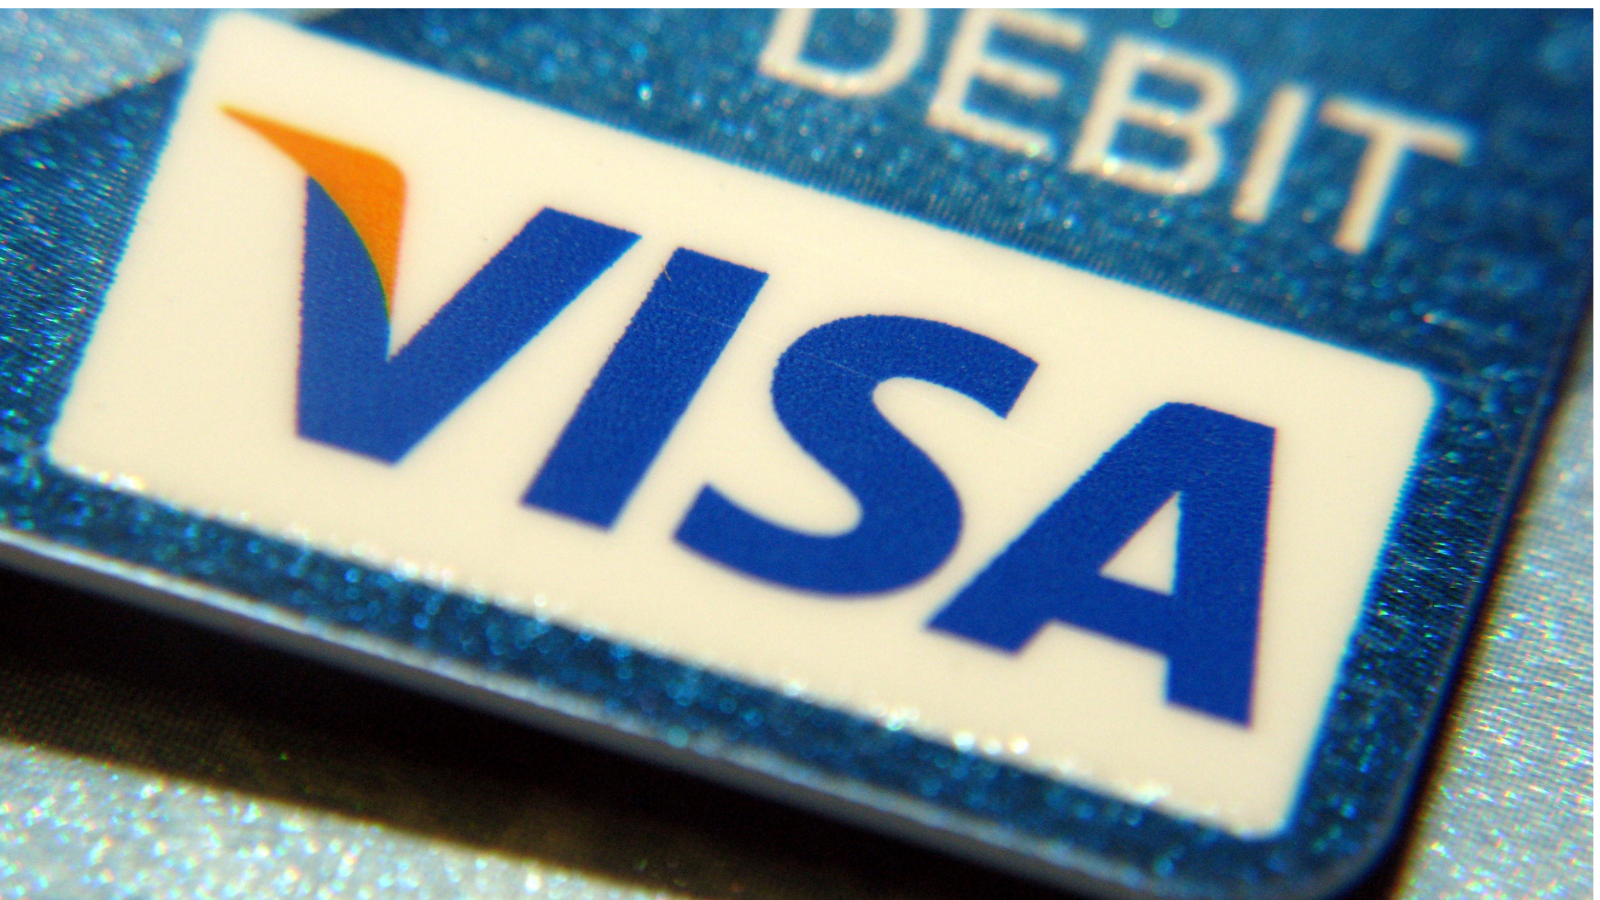 Picture of a debit card